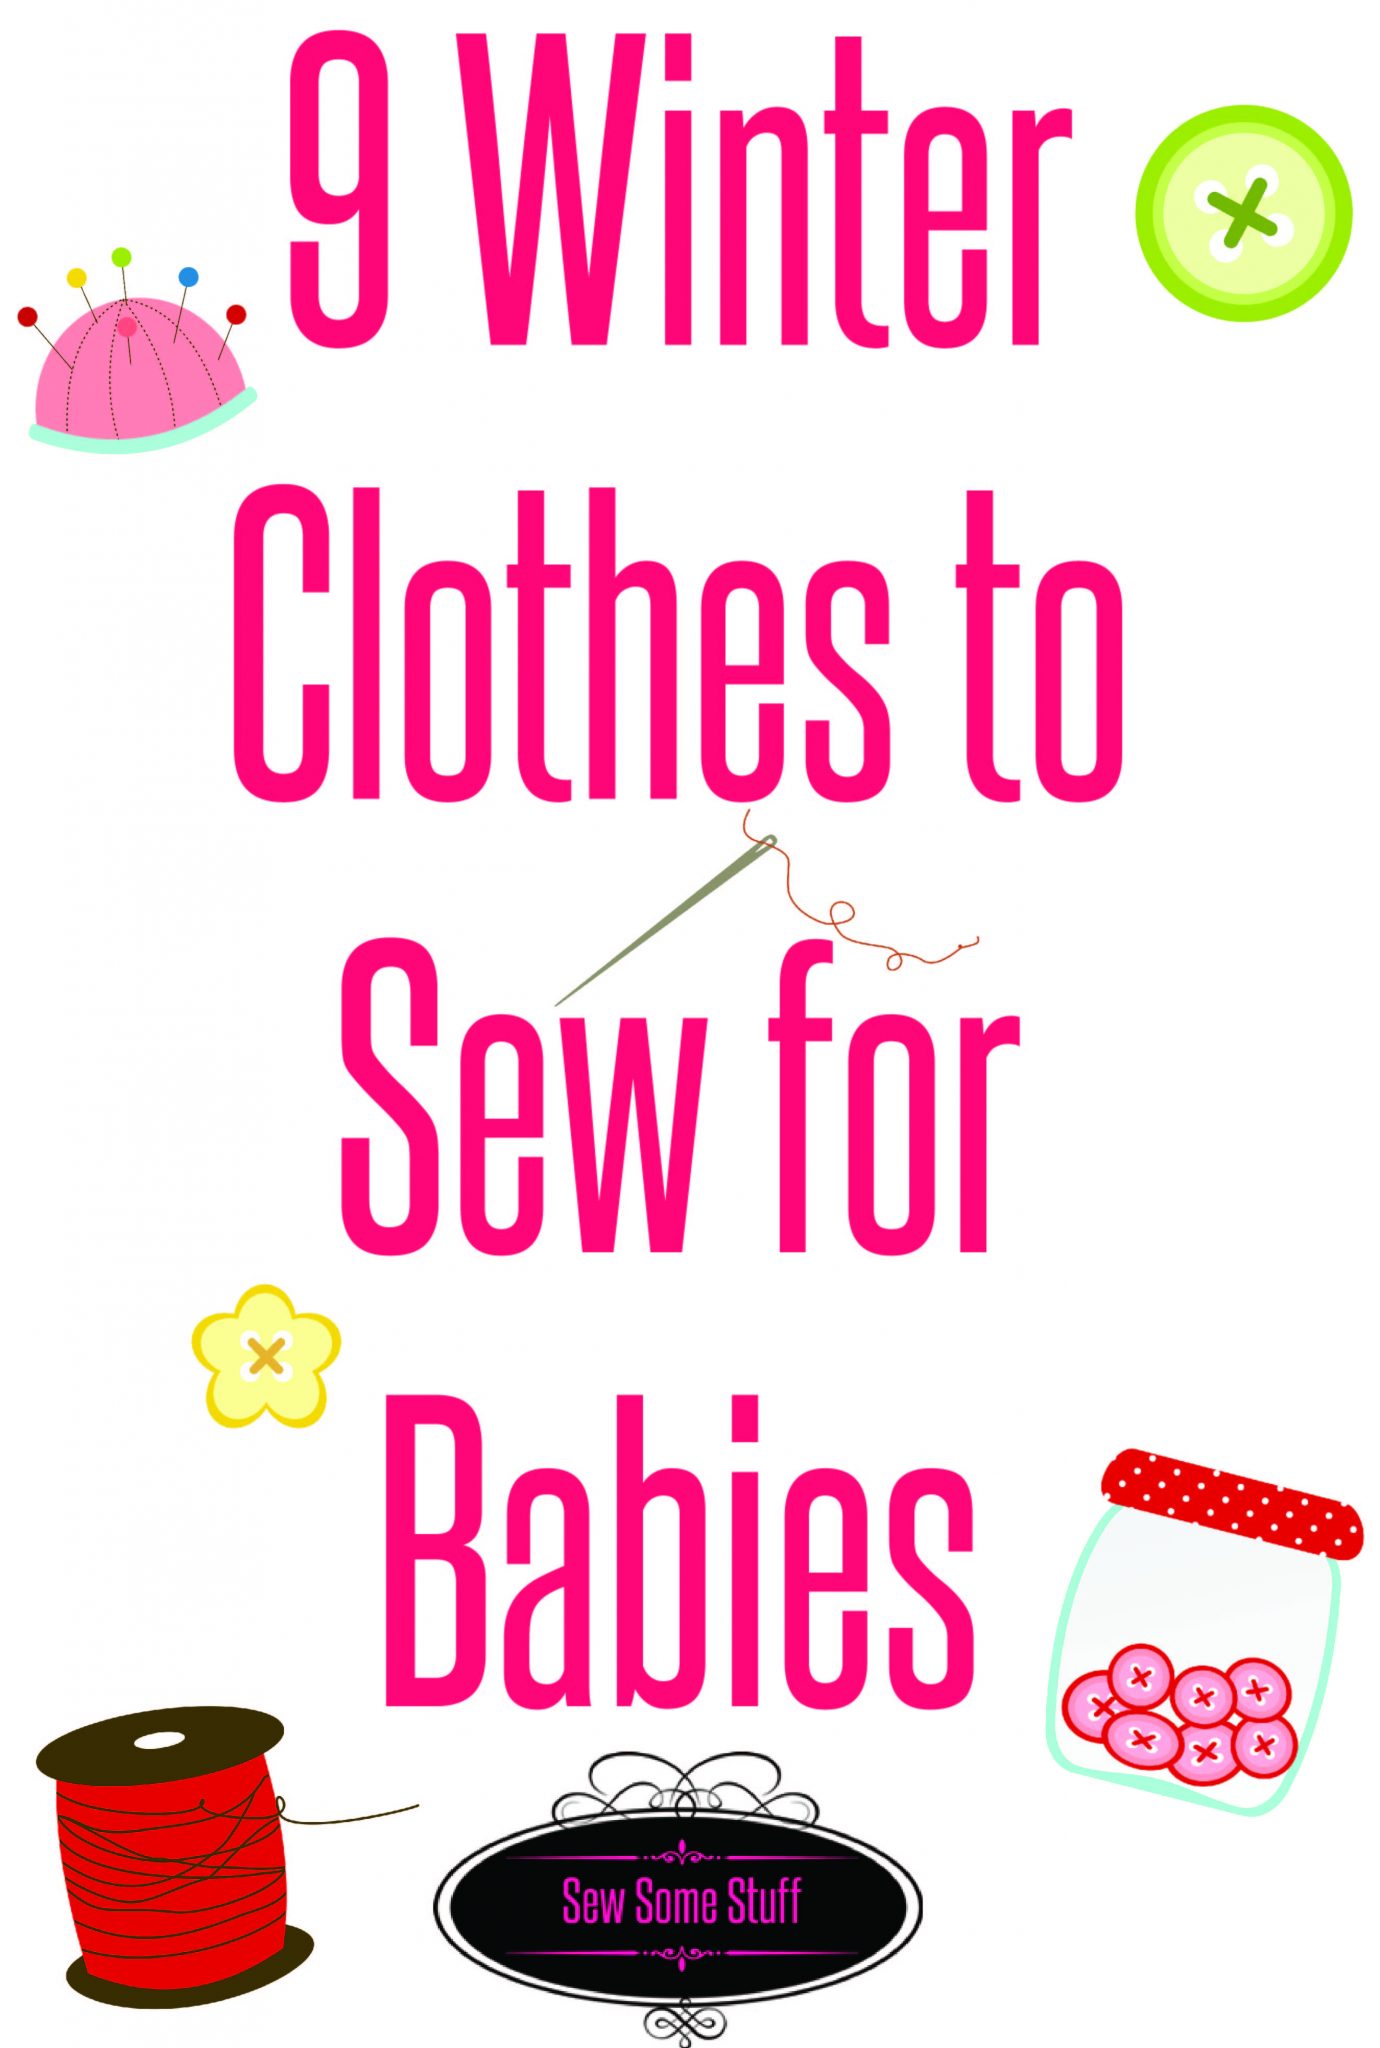 9 things to sew for babies on sewsomestuff.com. Winters are here and it's the perfect time to wrap the babies in super cute and snugly clothes. Want to try your hands on them? Here are 9 different clothing items to choose from. Check out these cuties now! 